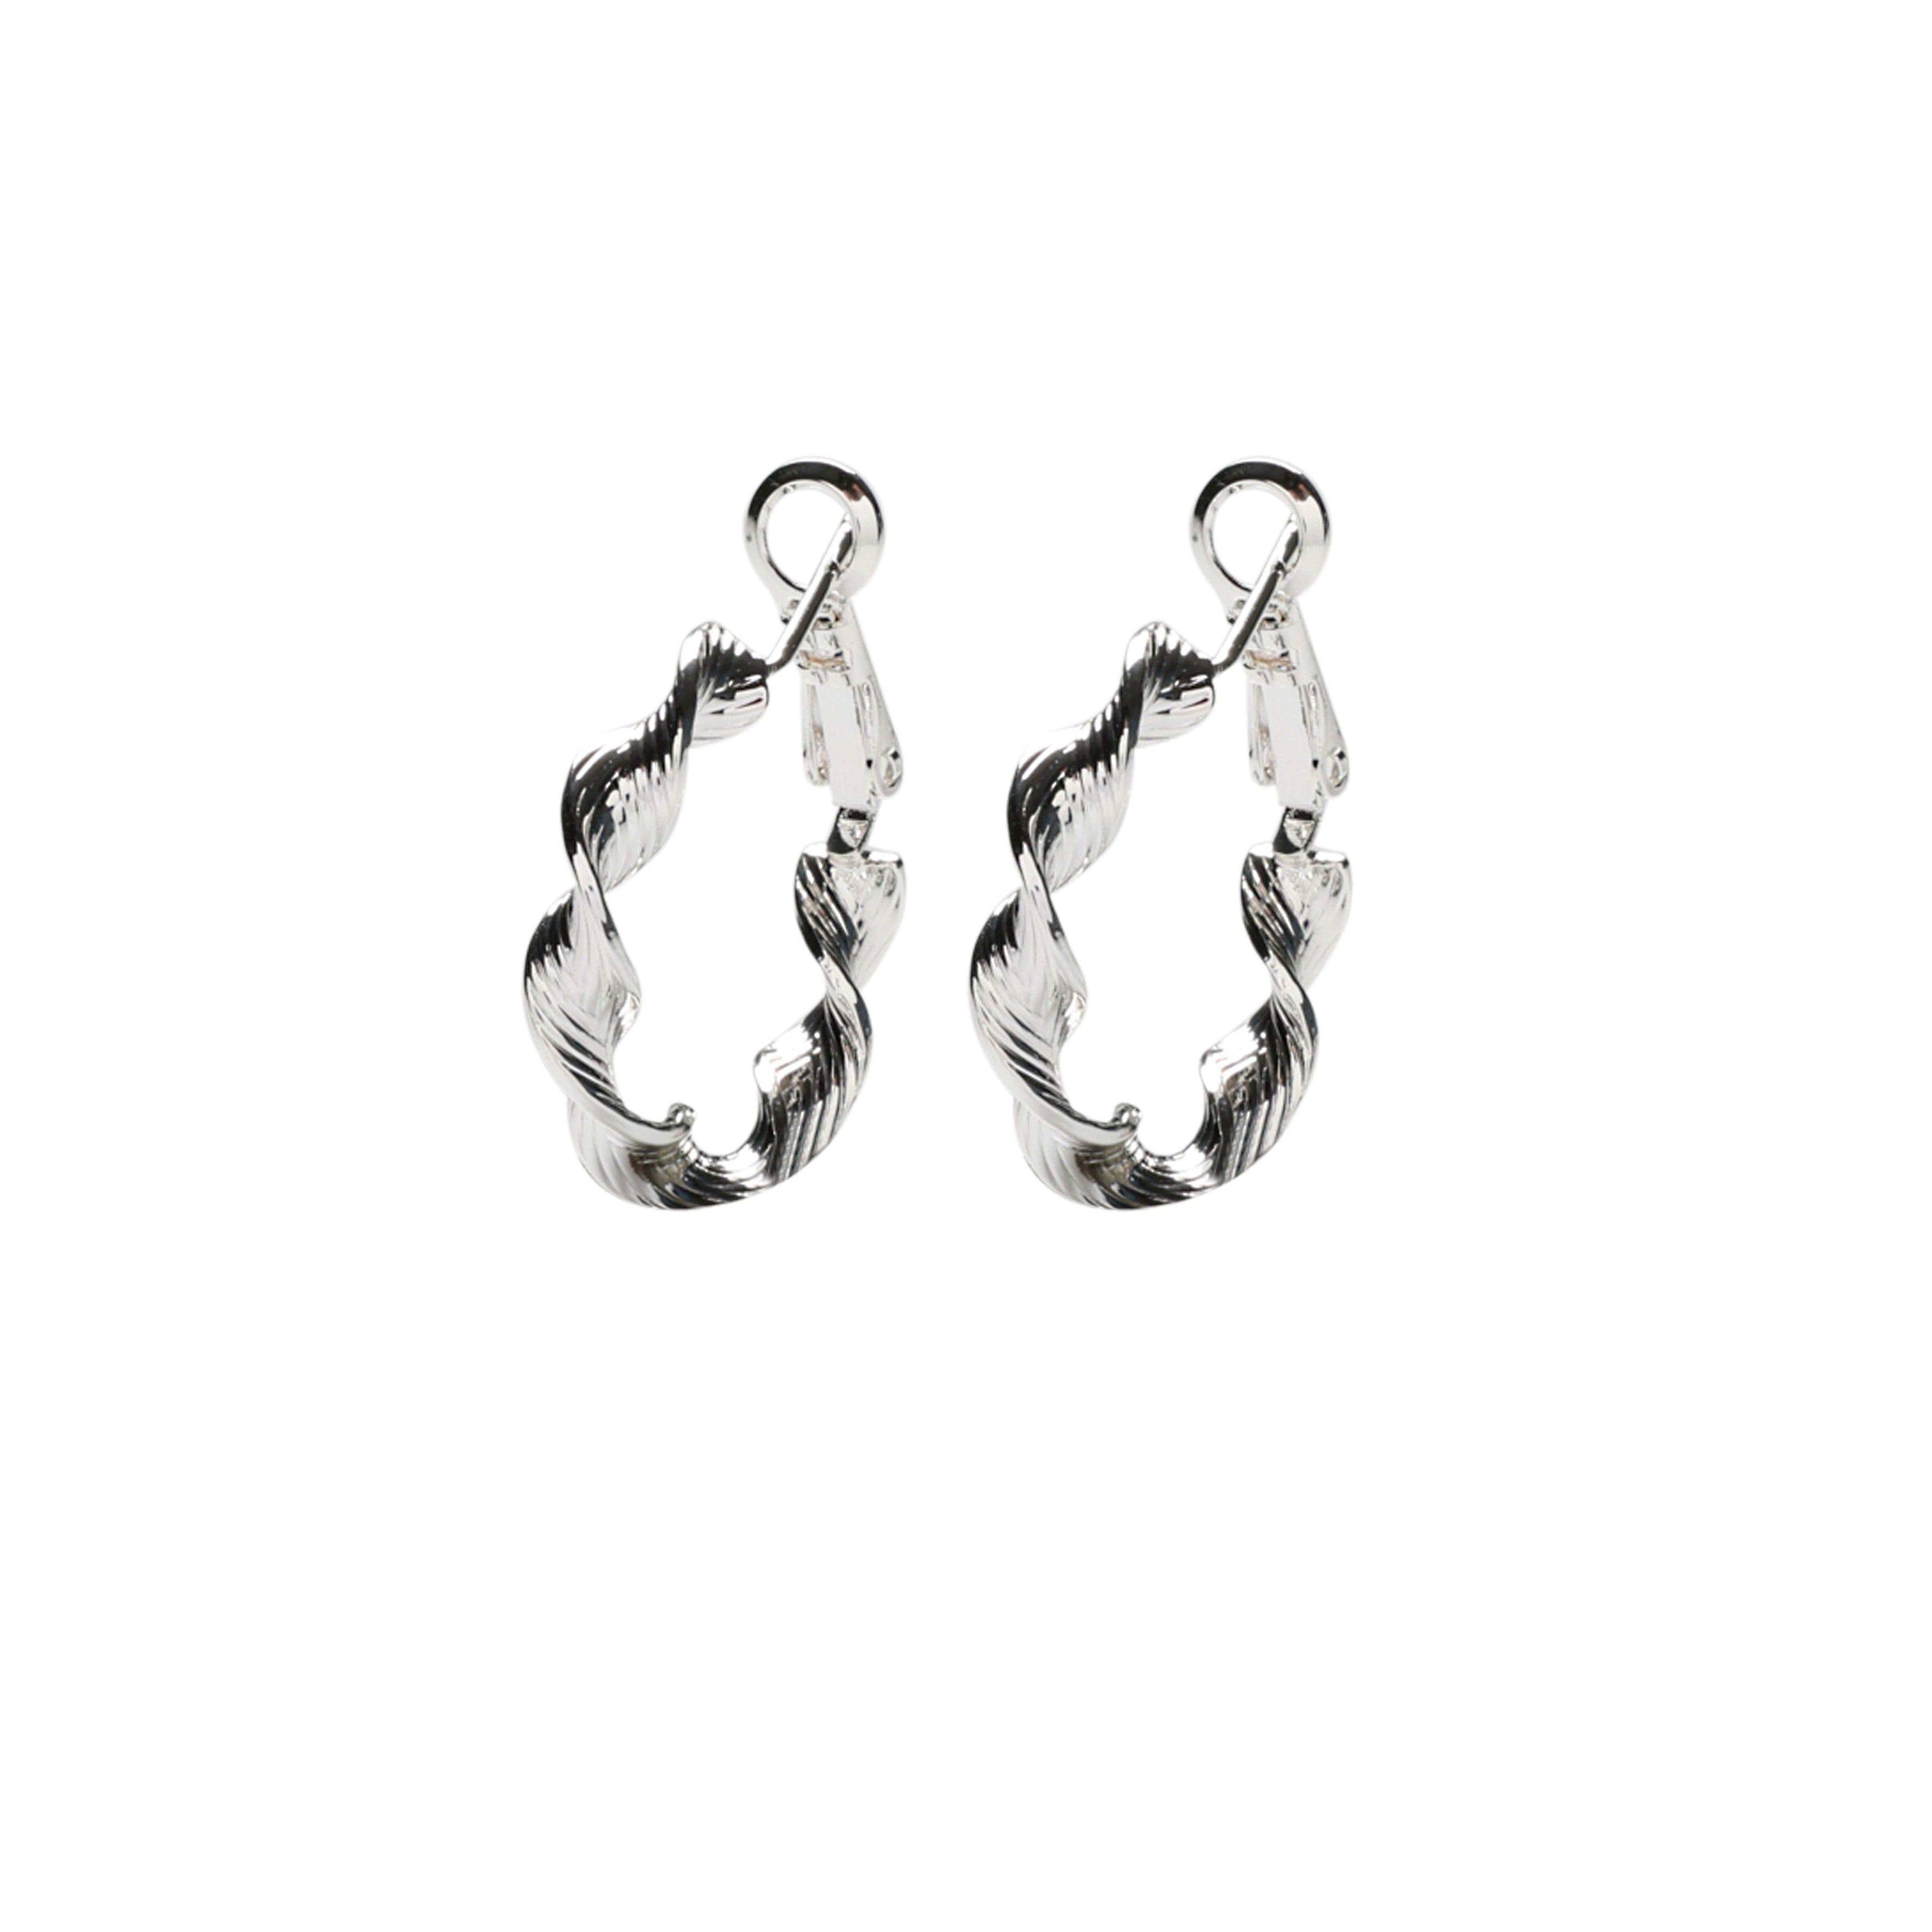 Twisted hoops - 22mm, 925S Sterling silver plated, 1 pair